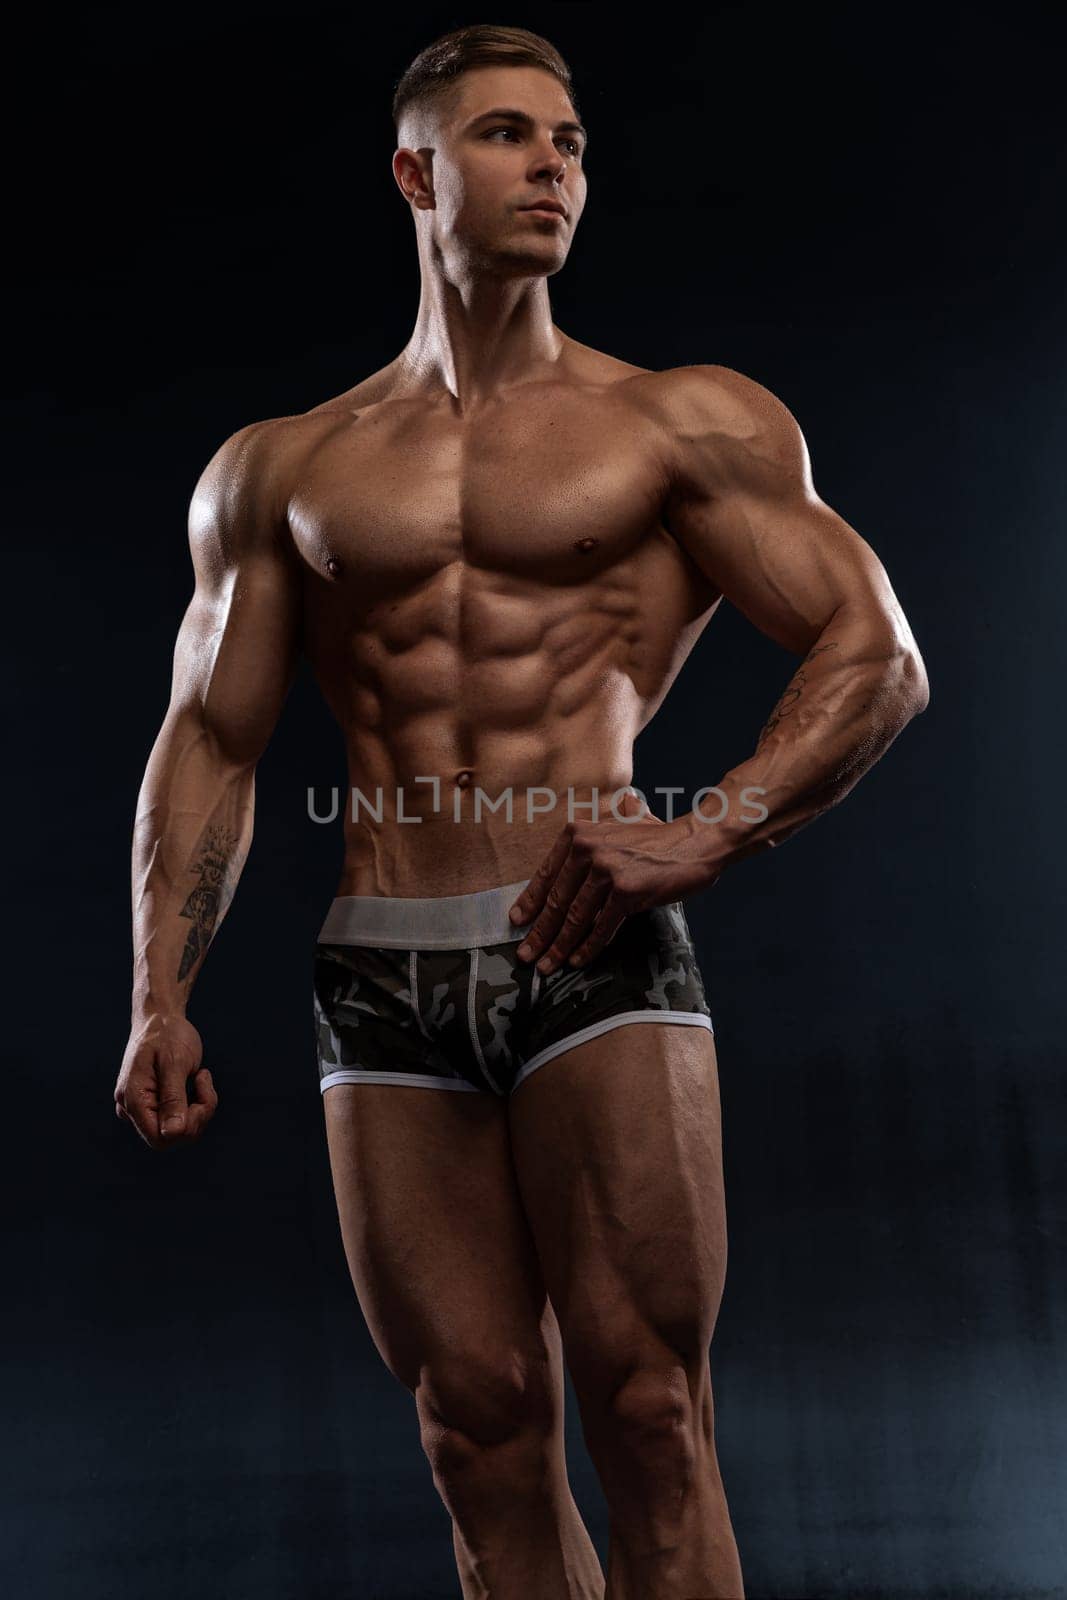 Attractive sexy bodybuilder posing in shorts in the studio on black background, demonstrating a muscular strong body. The concept of hard work in gym and body aesthetics